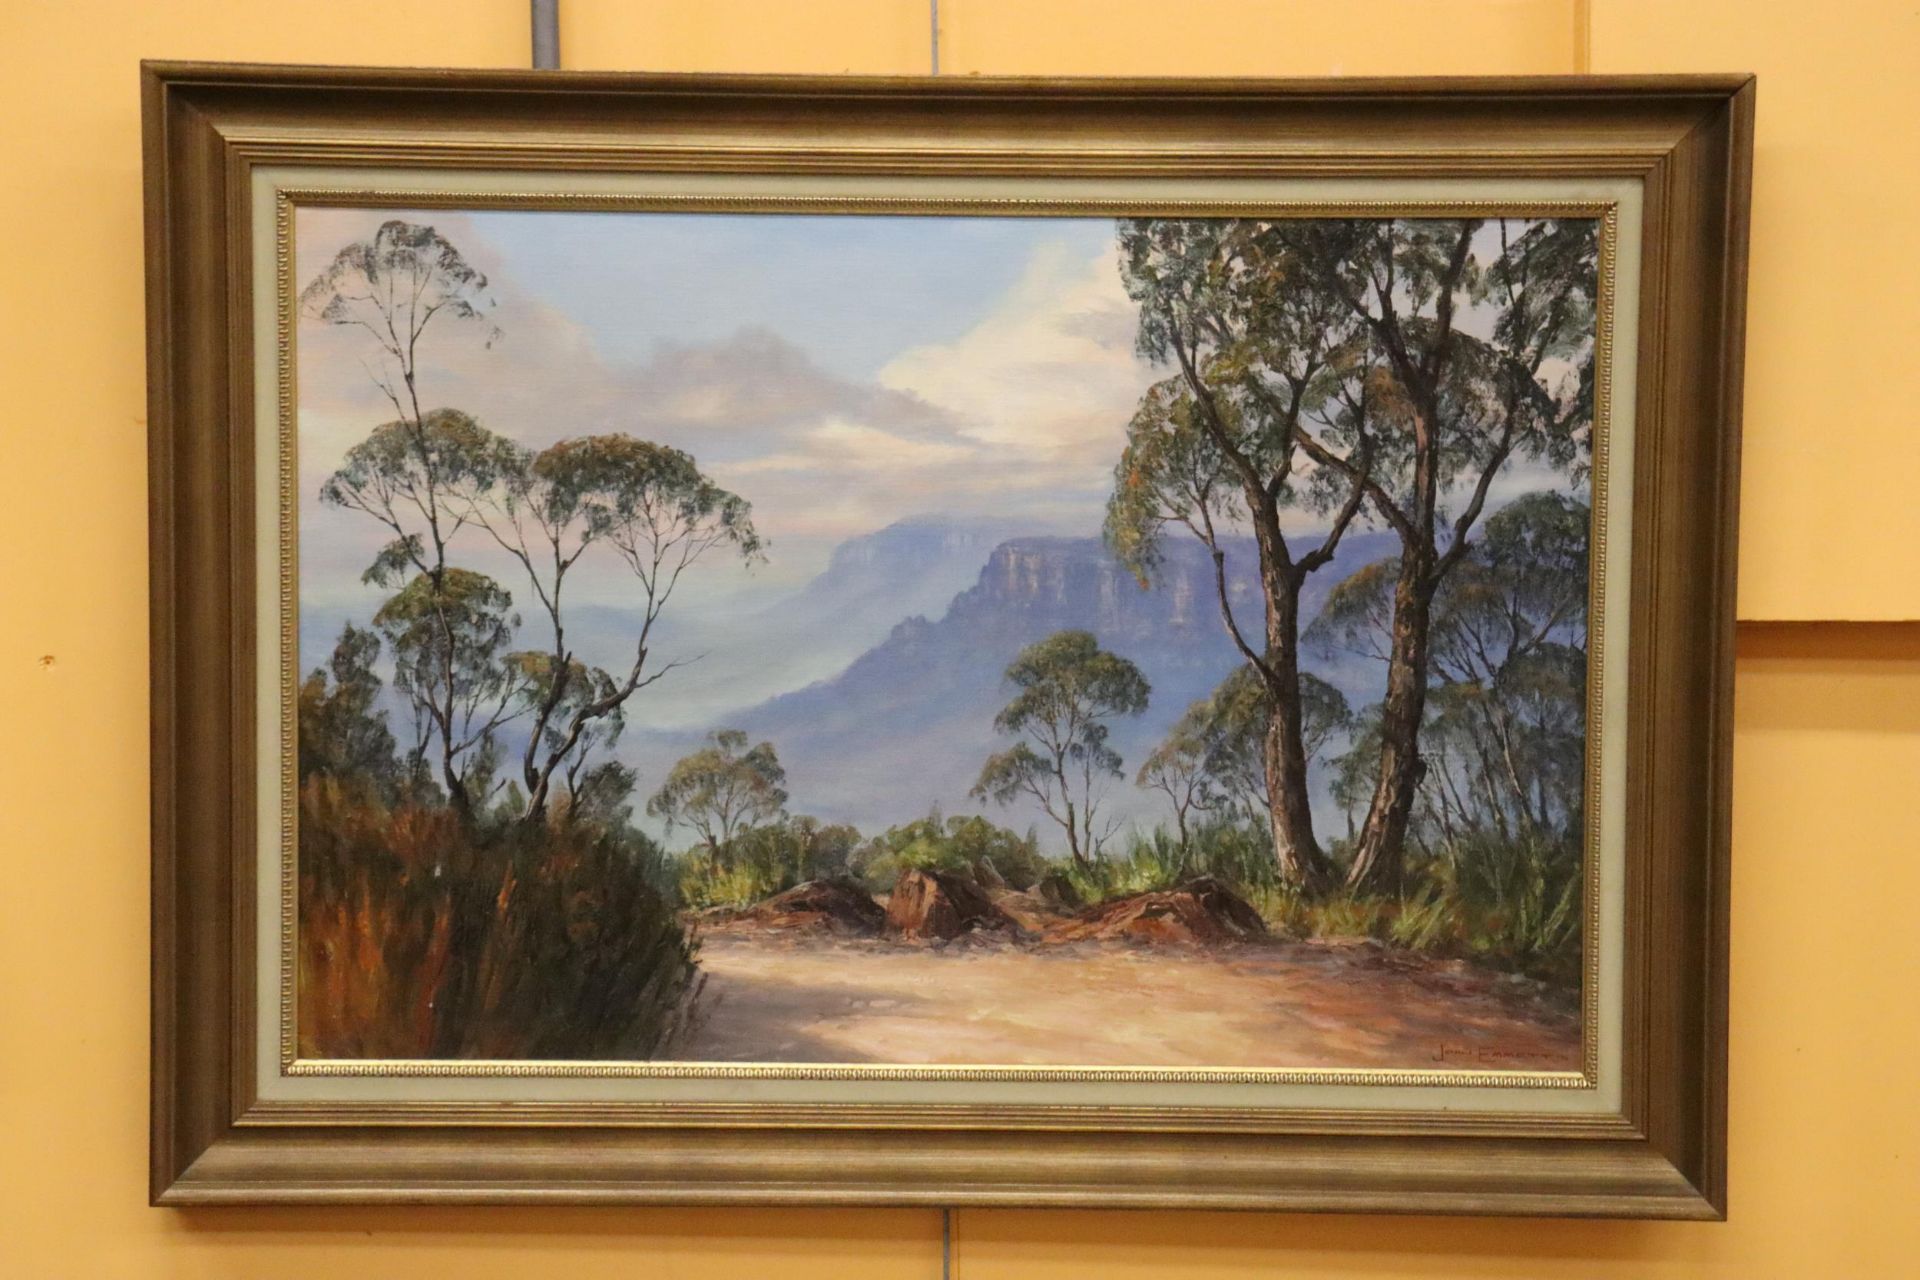 A LARGE OIL ON CANVAS OF A MOUNTAIN THROUGH A CLEARING, SIGNED JOHN EMMETT '76, IN A GILT FRAME,